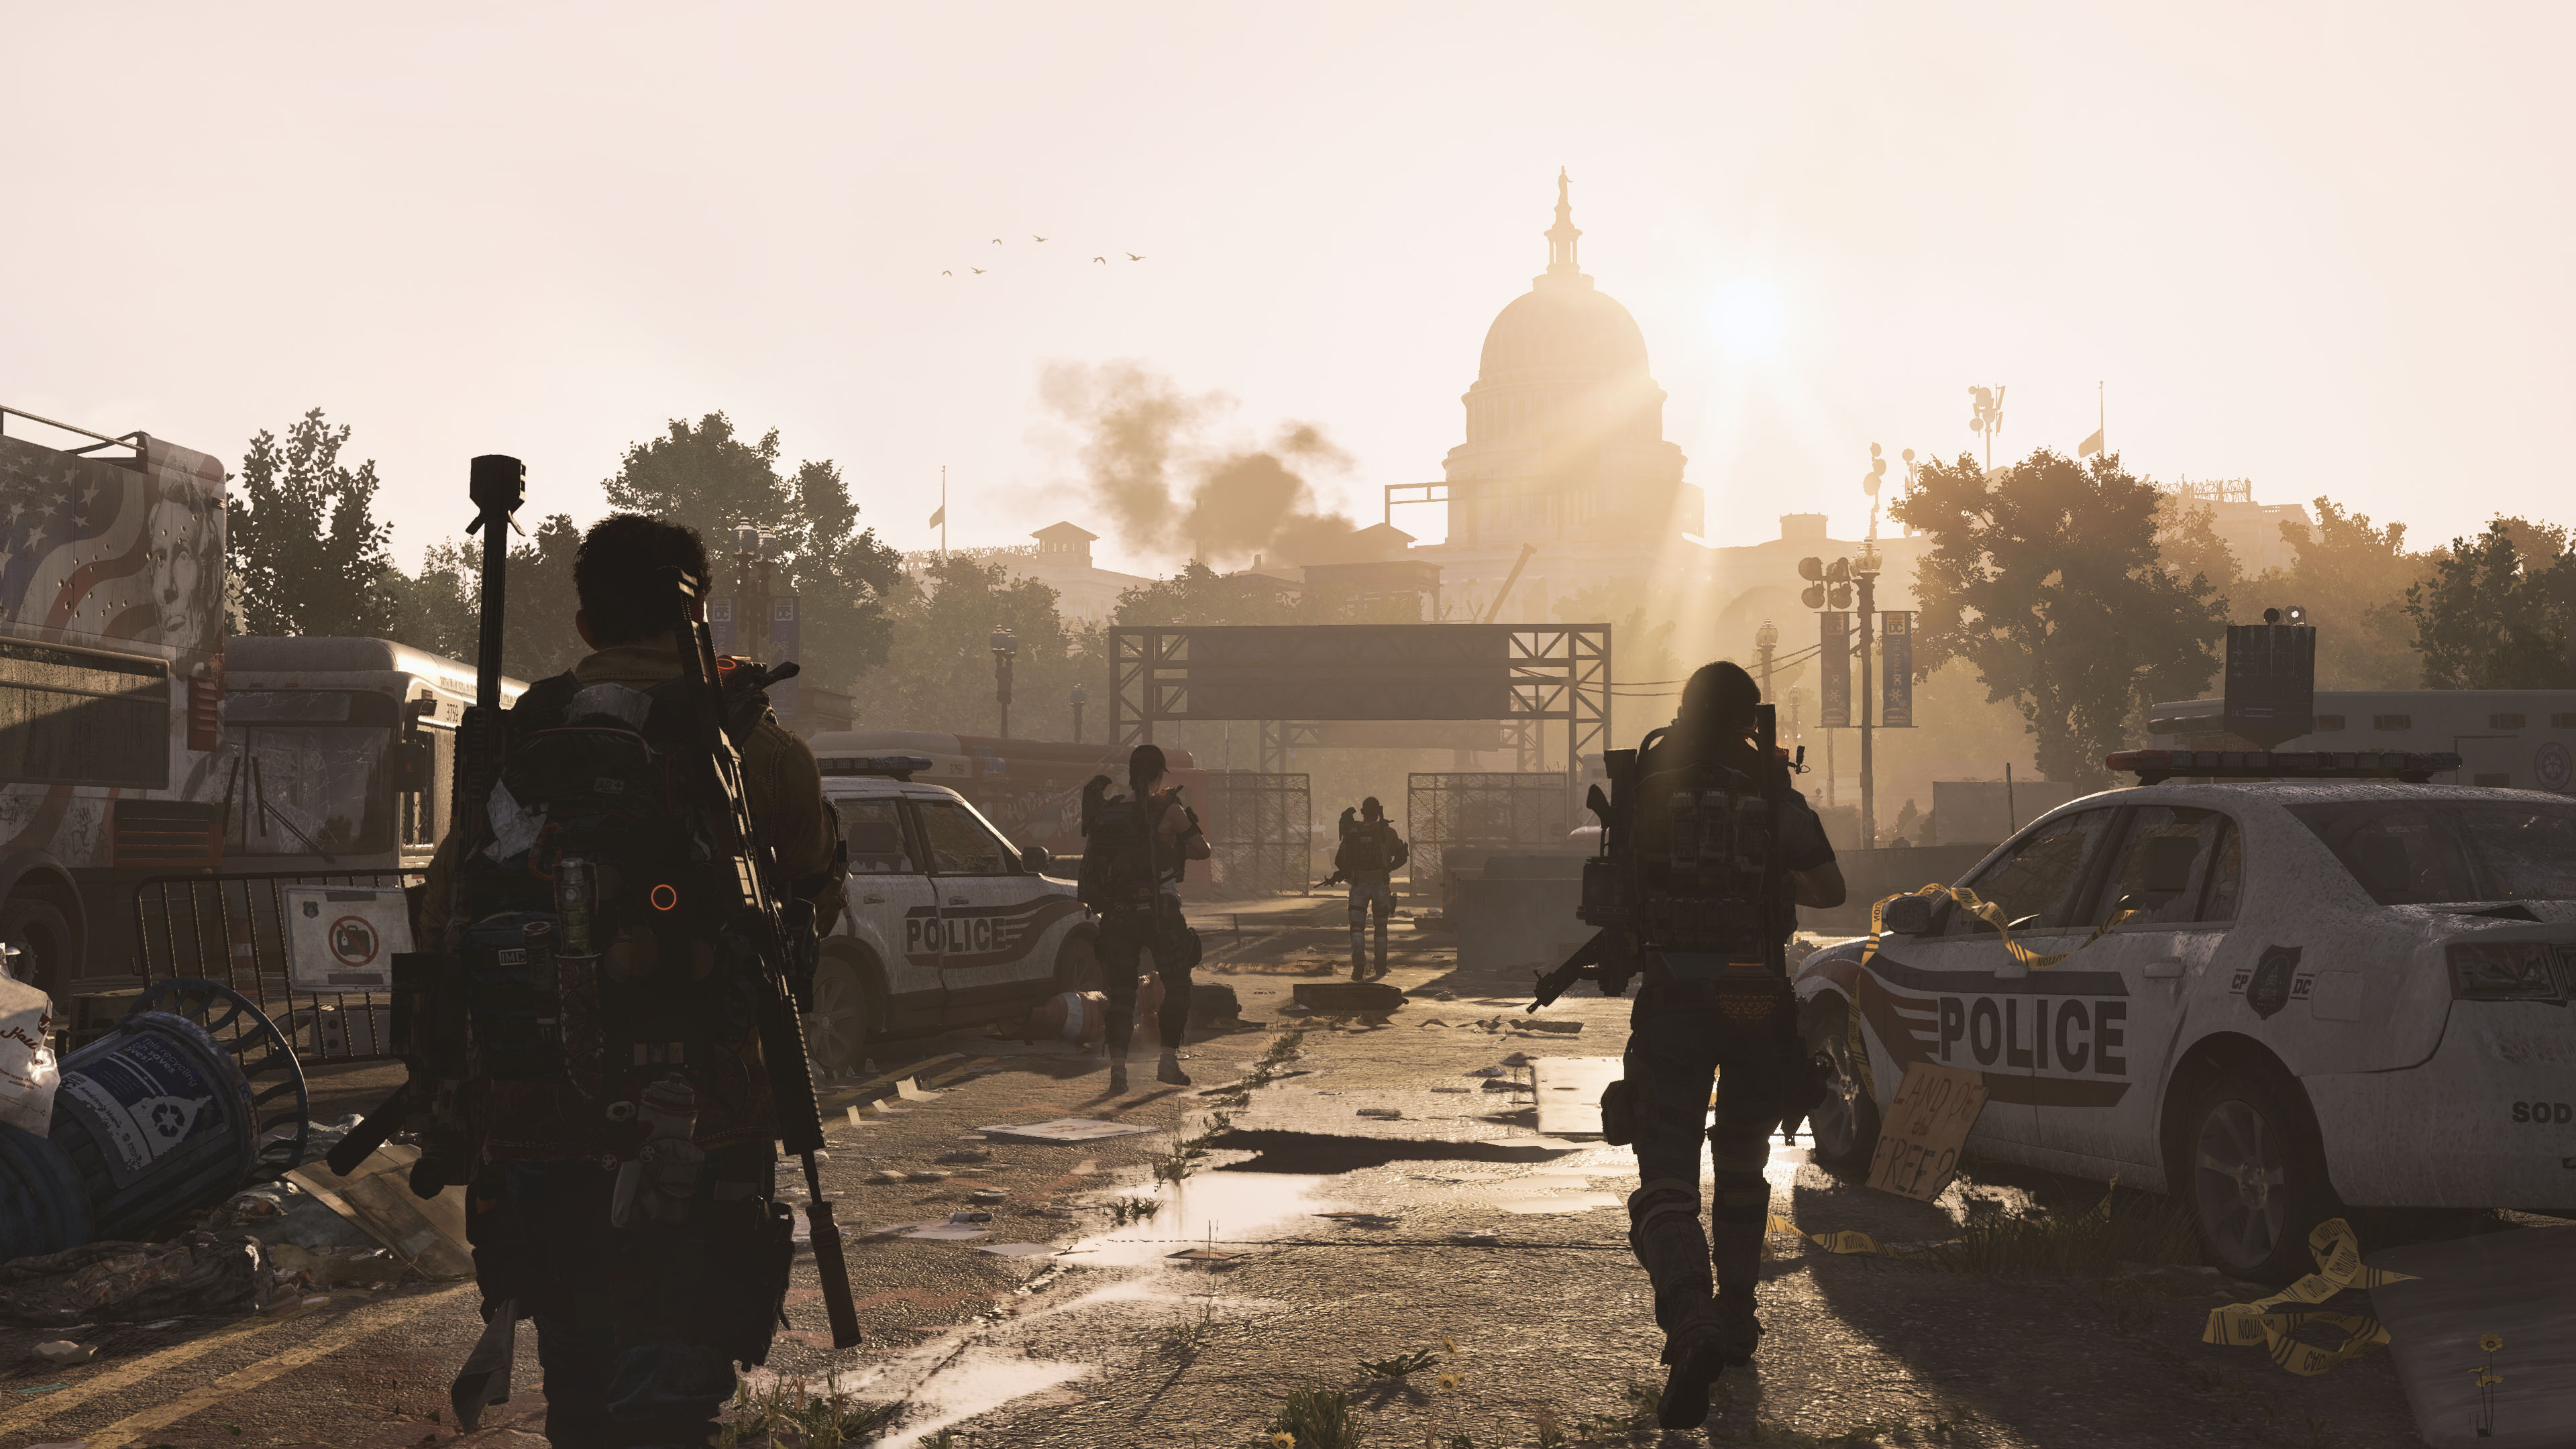 Upgrade to The Division 2 Gold Edition